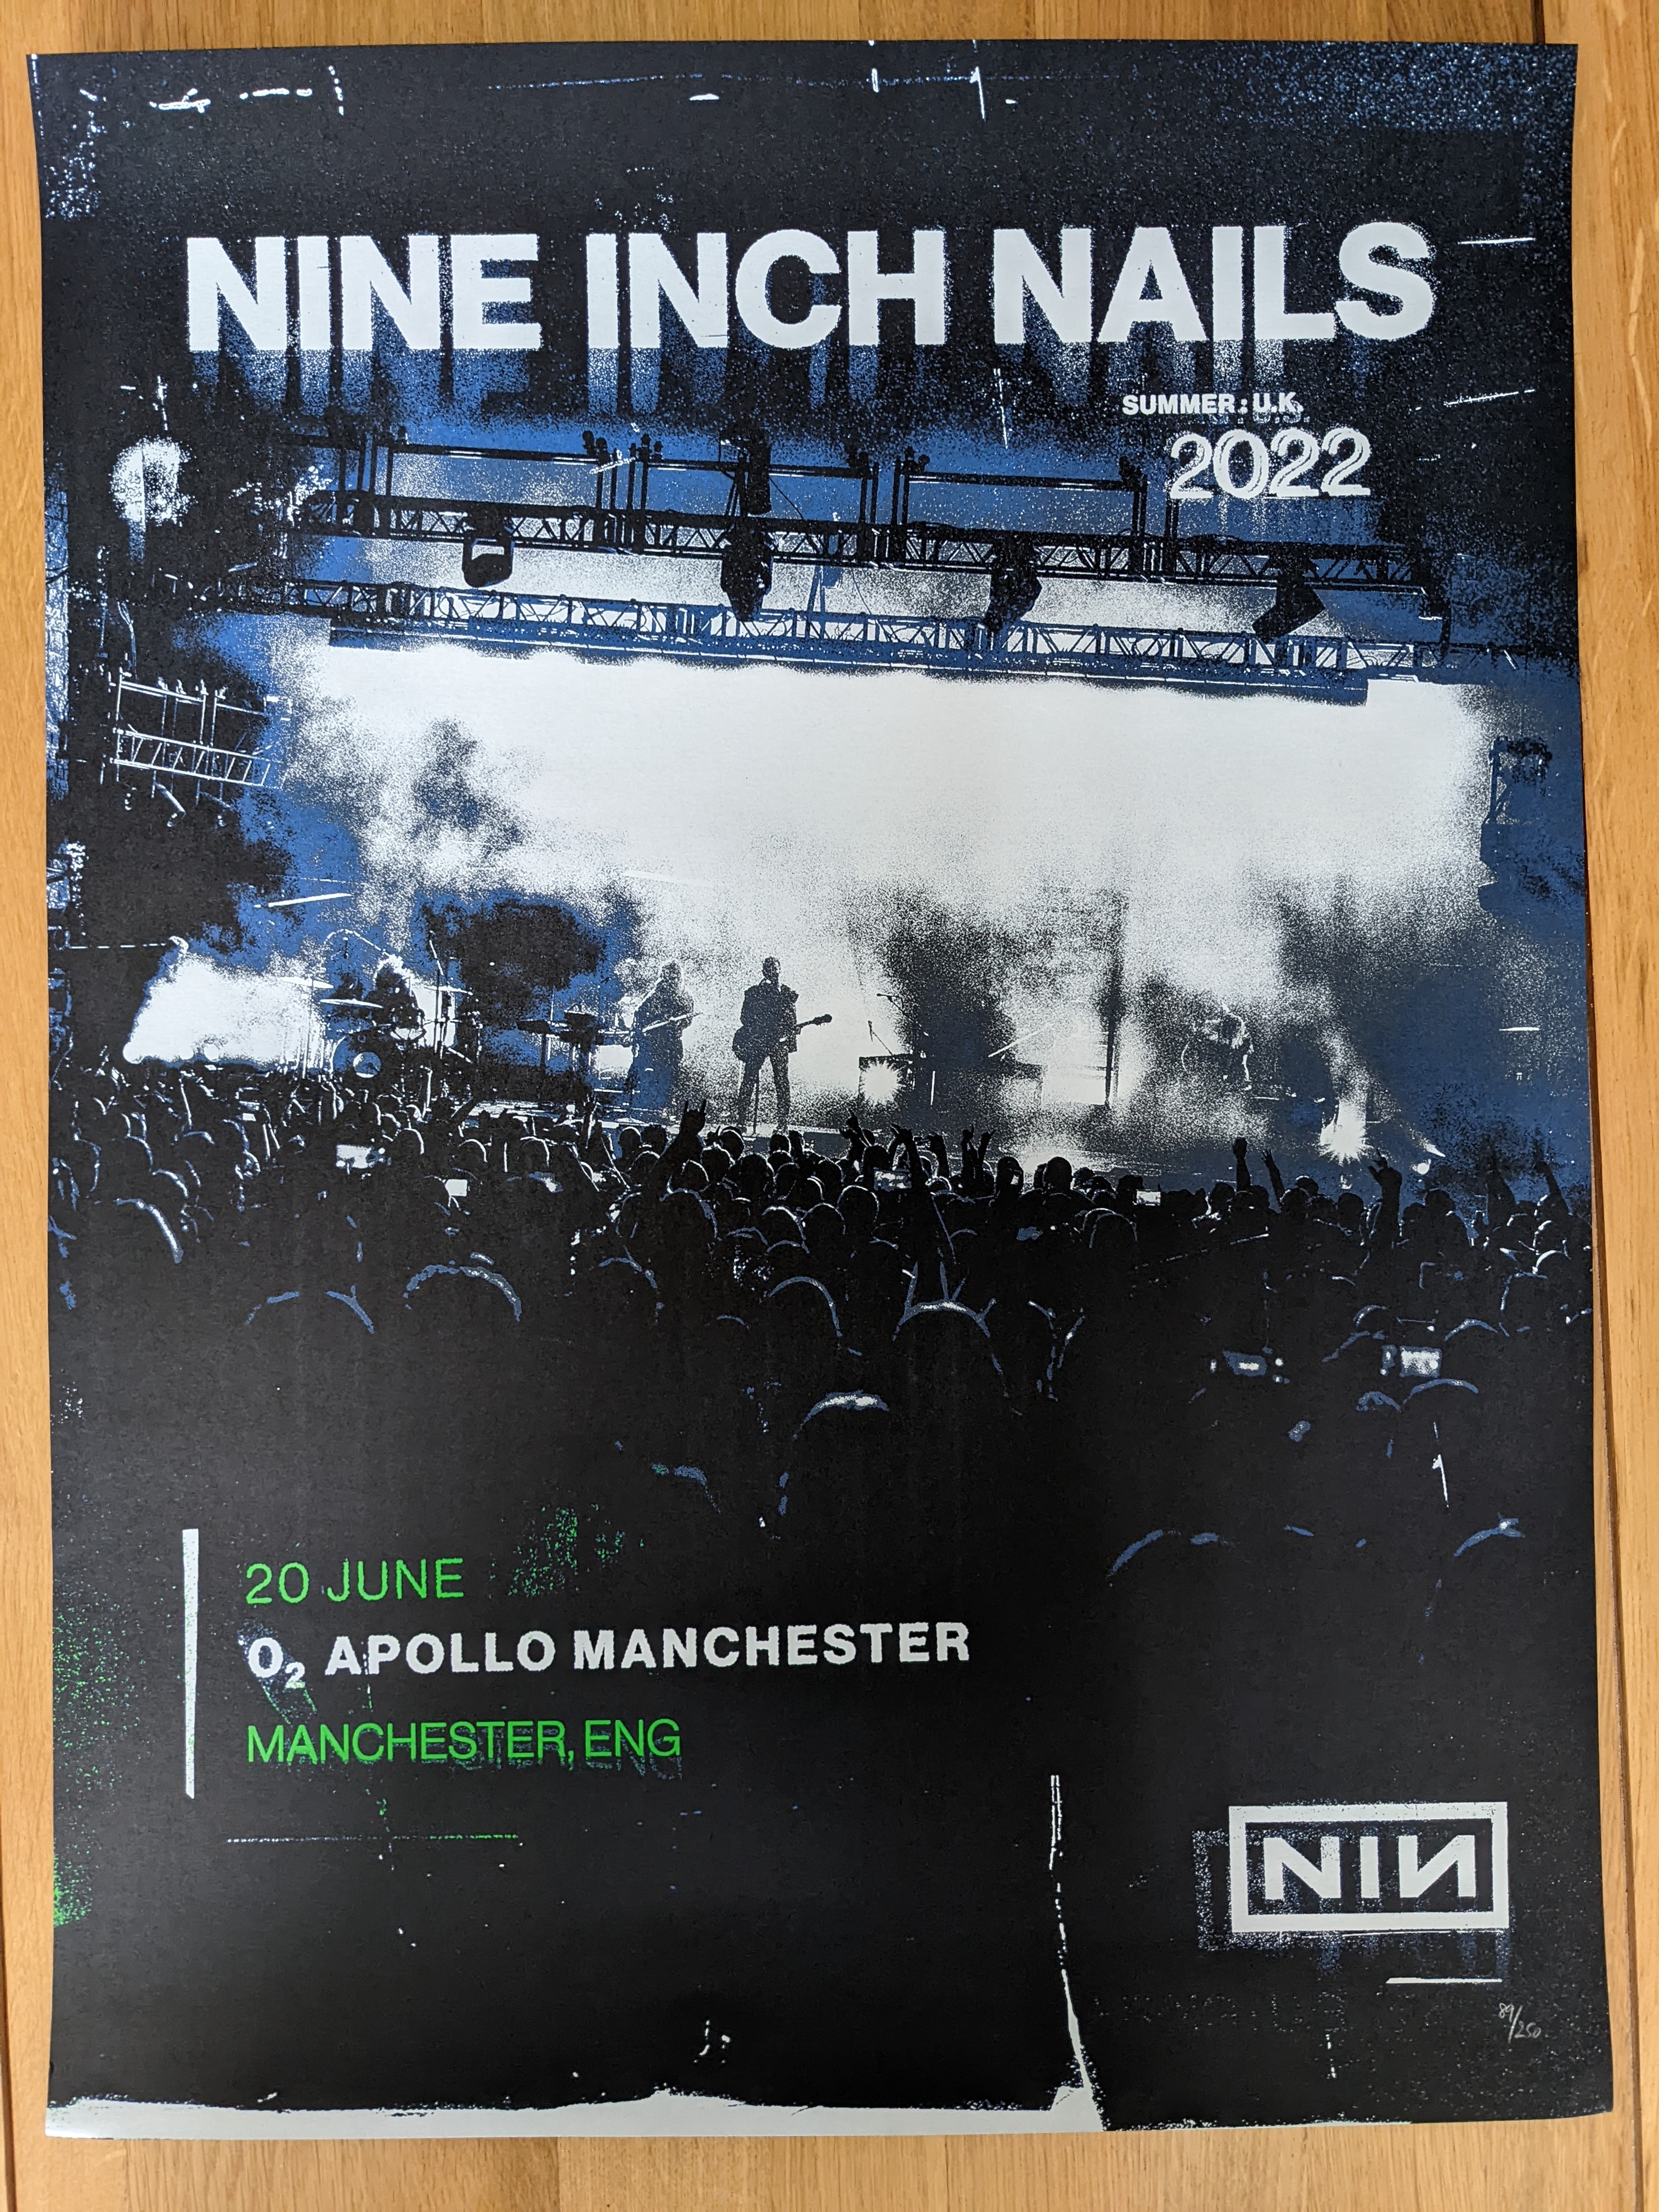 <a href='https://www.ebay.com/sch/i.html?_from=R40&_trksid=p2323012.m570.l1313&_nkw=Nine+Inch+Nails+Poster+Manchester&_sacat=0&mkcid=1&mkrid=711-53200-19255-0&siteid=0&campid=5336302525&customid=poster&toolid=10001&mkevt=1'>Buy this Poster!</a>